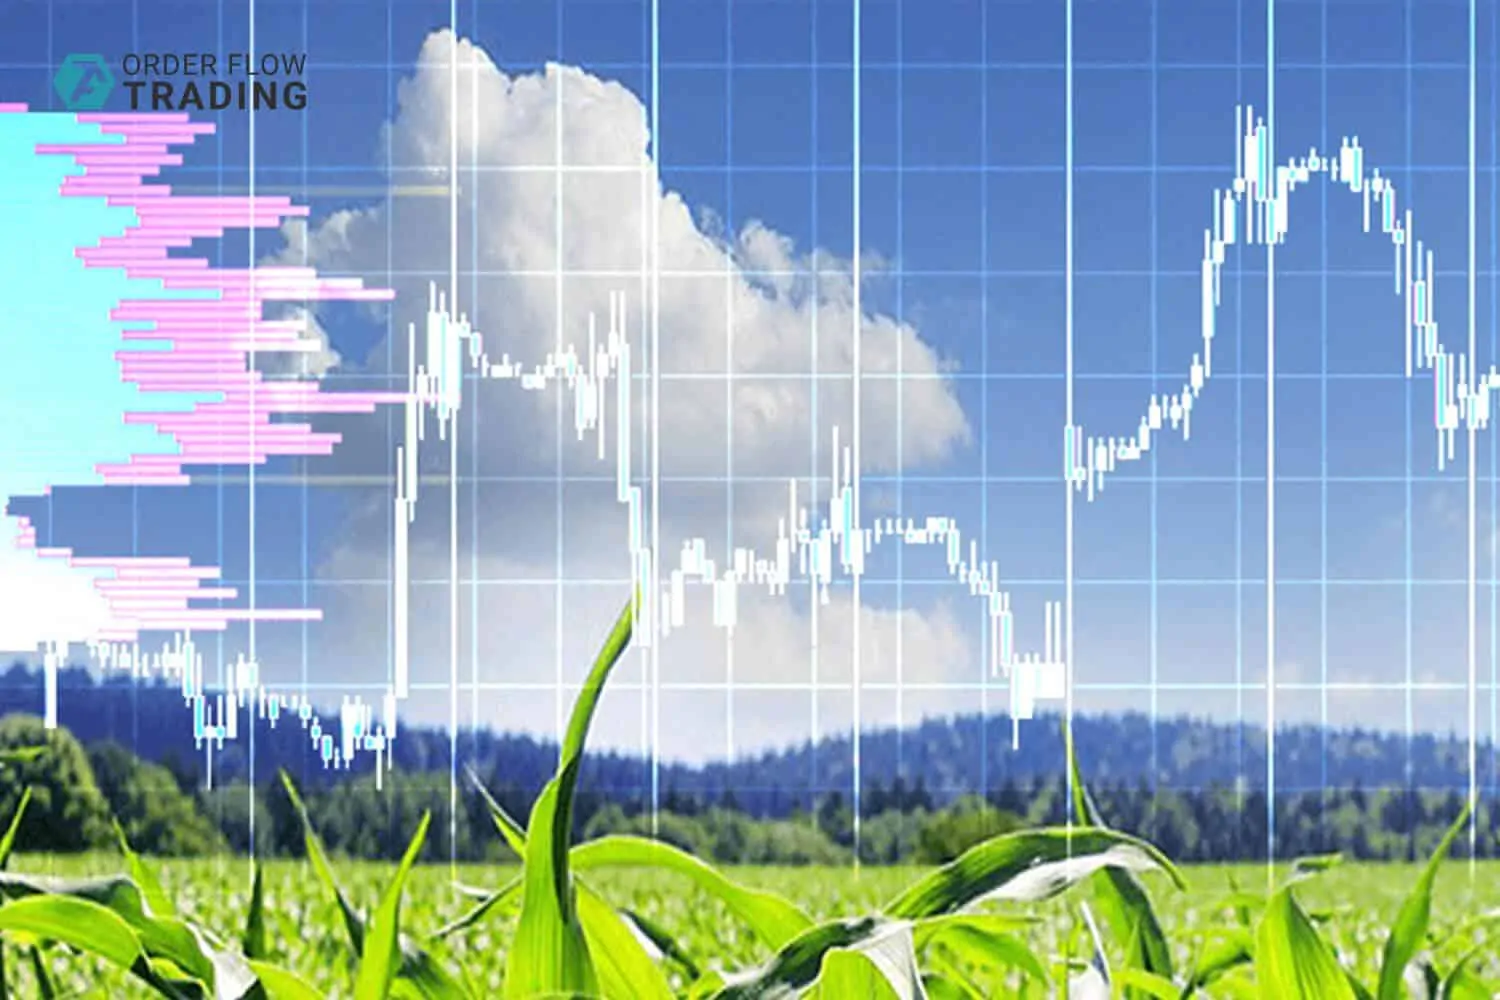 Corn futures: 7 important things you should know. Part 1